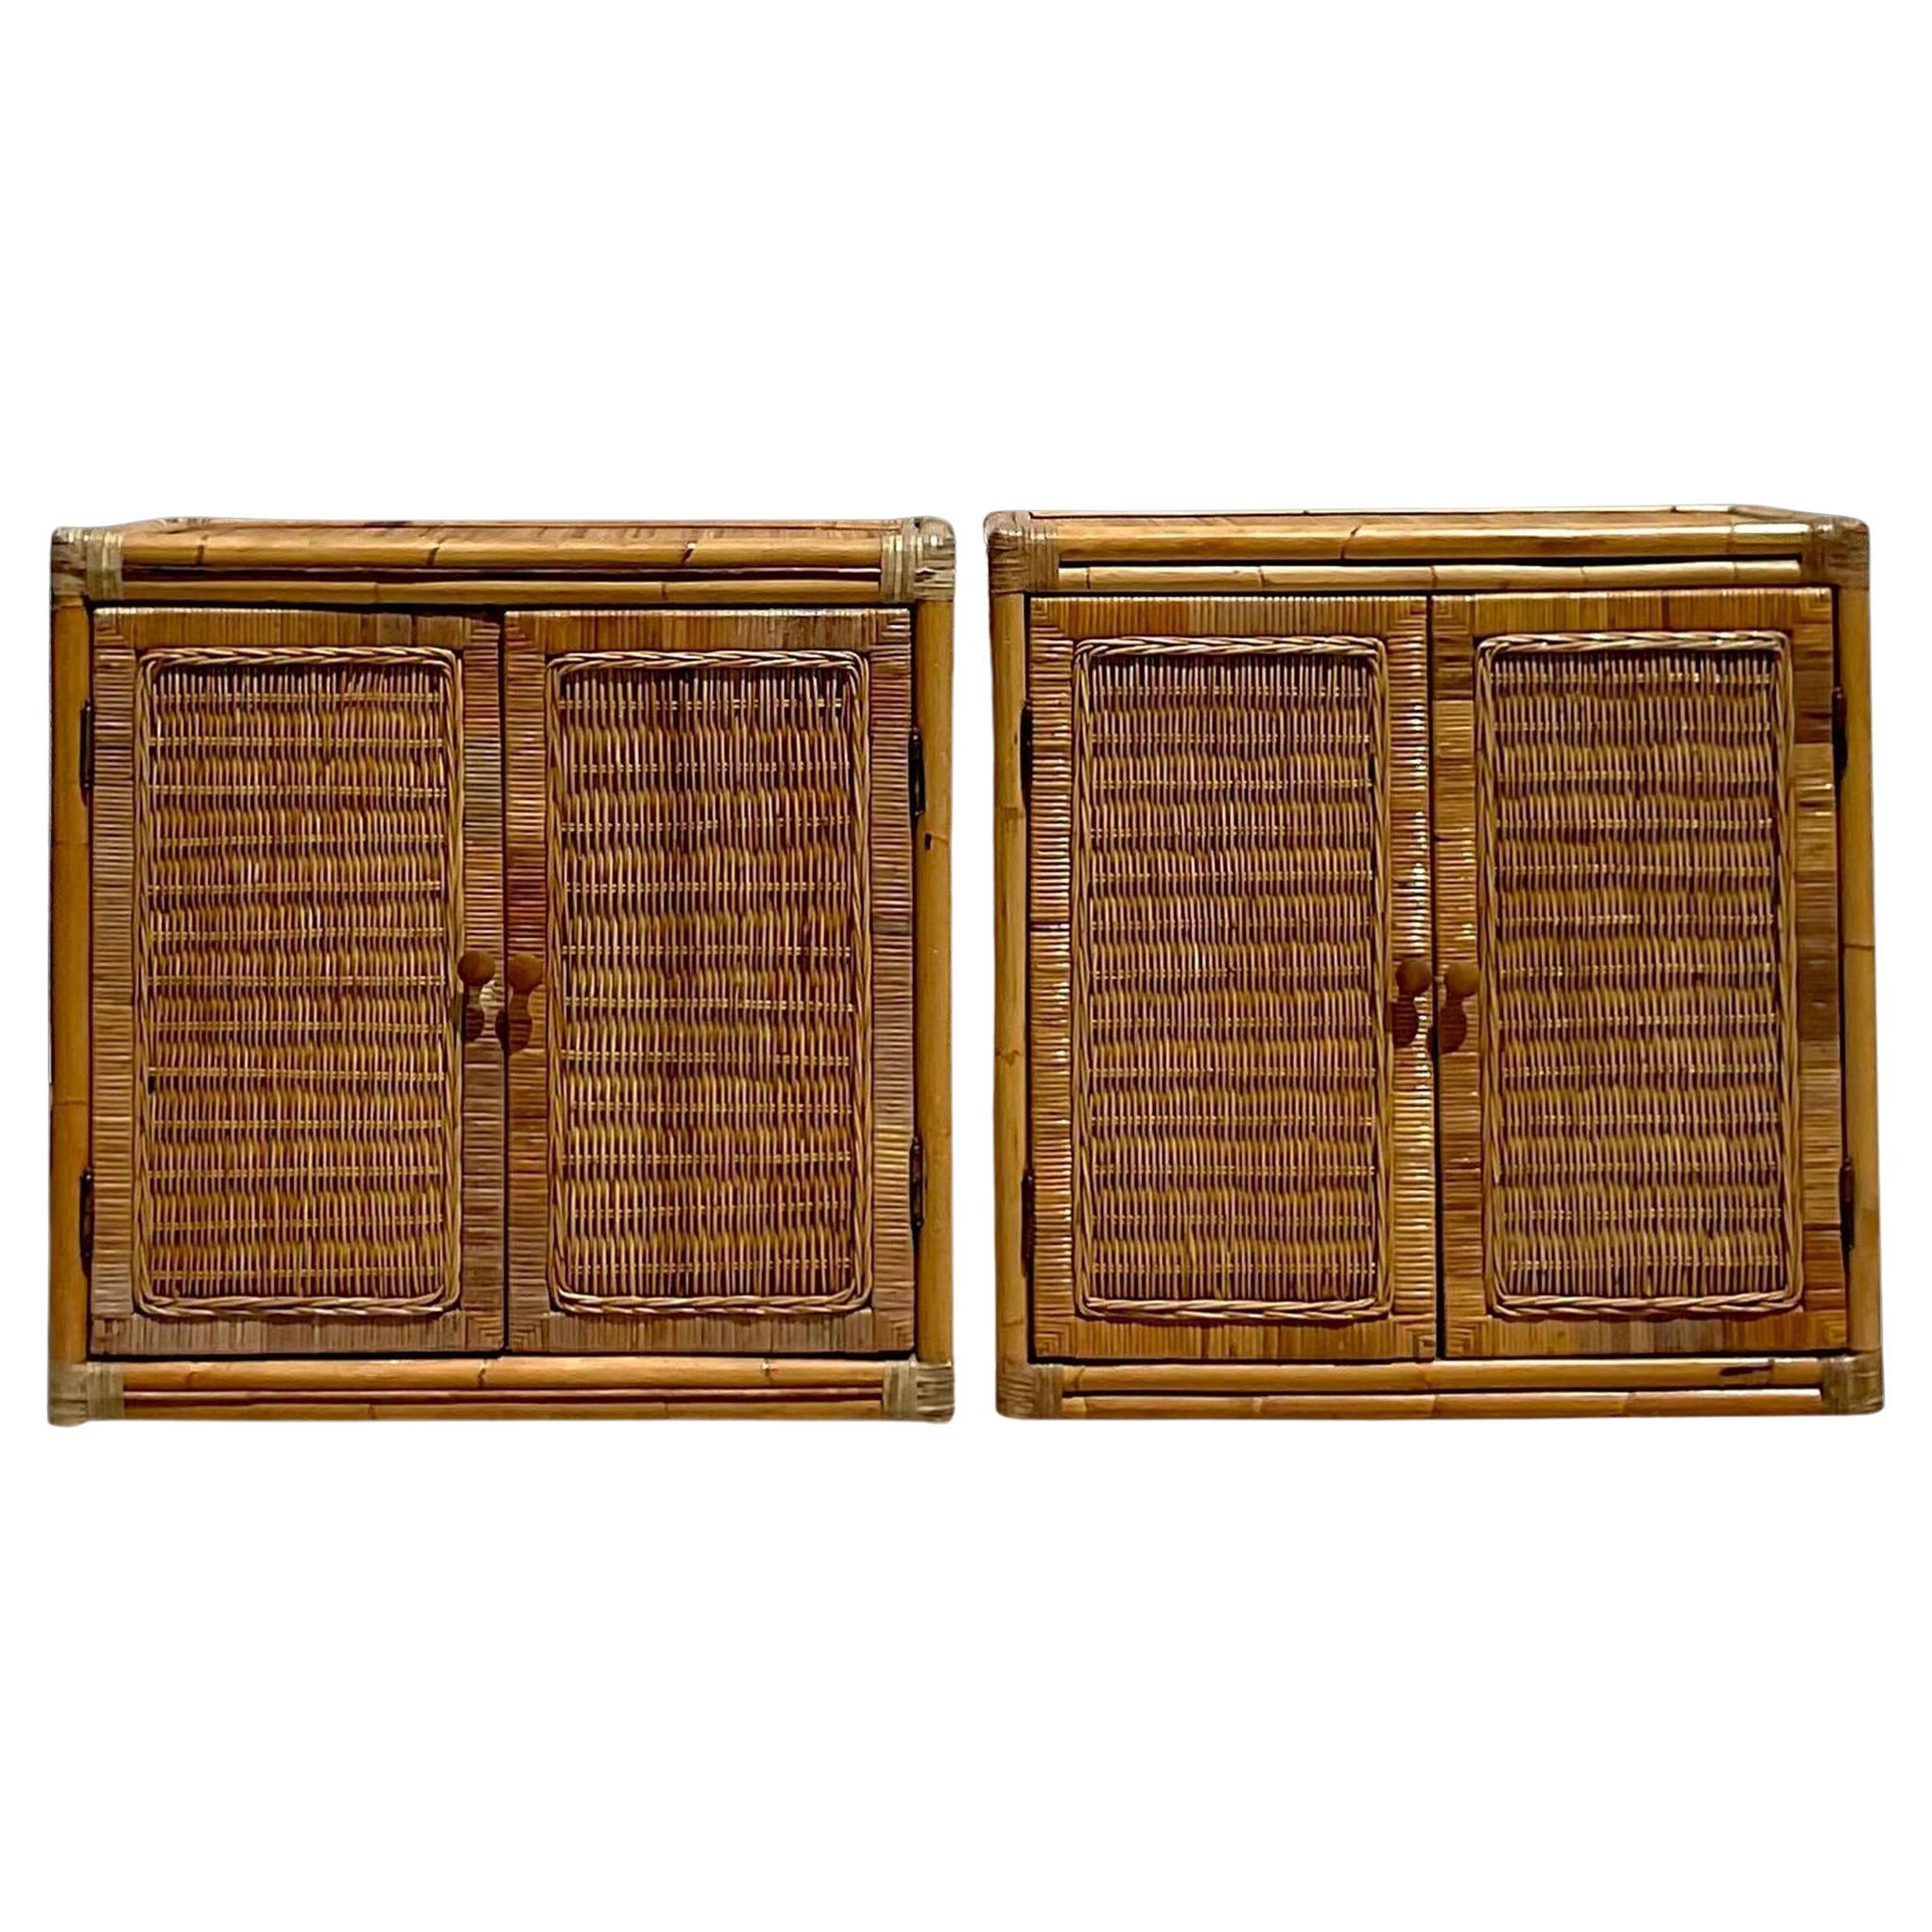 Late 20th Century Vintage Coastal Woven Rattan Cabinets - a Pair